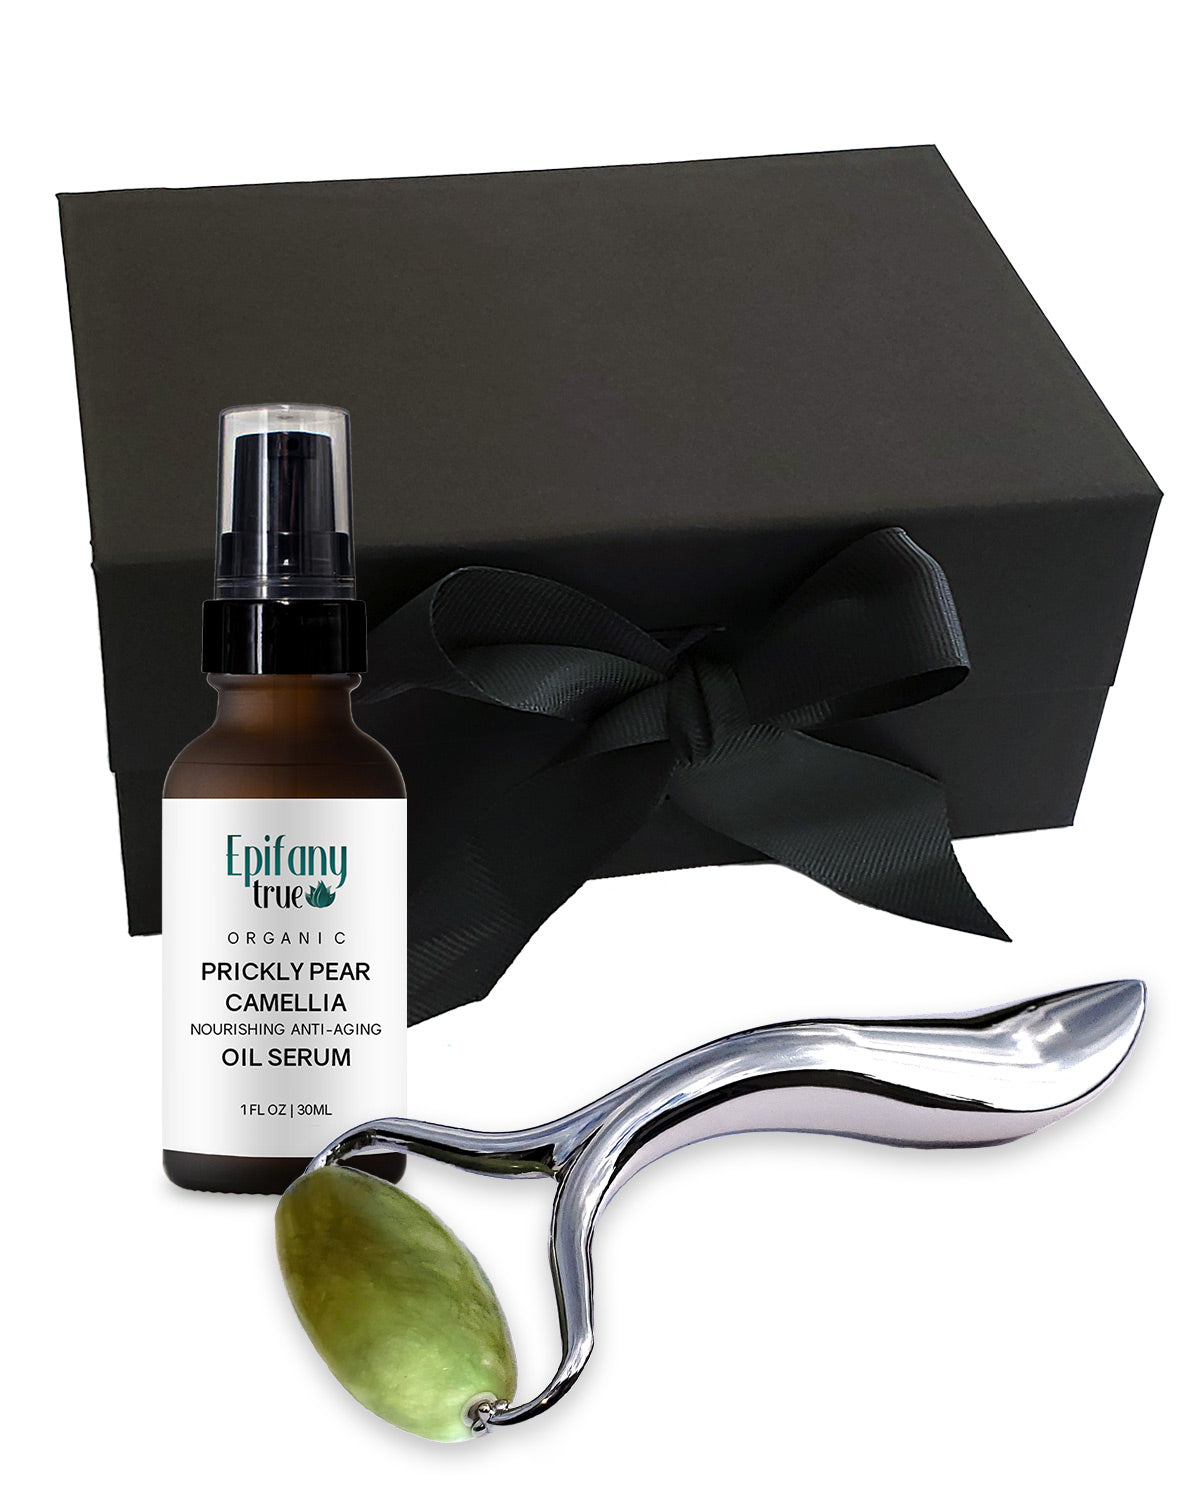 Epifany True Prickly Pear & Camellia Face Oil Serum and Natual Jade Roller Gift Set